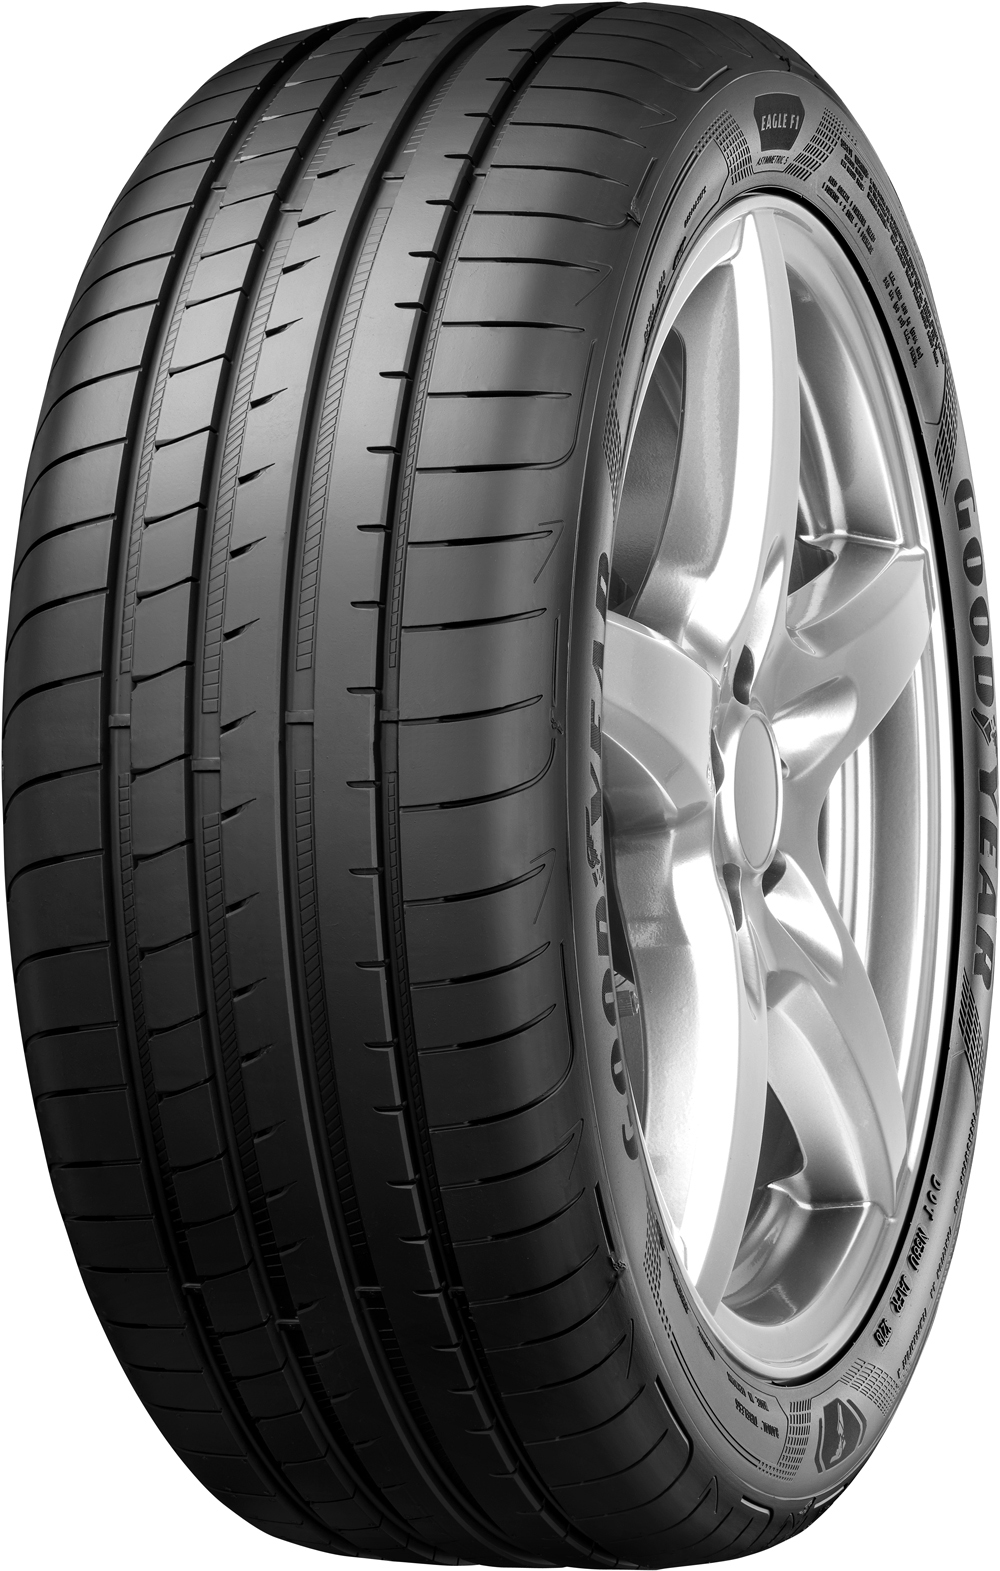 Anvelope auto GOODYEAR EAGF1AS5MO XL MERCEDES 245/35 R20 95Y